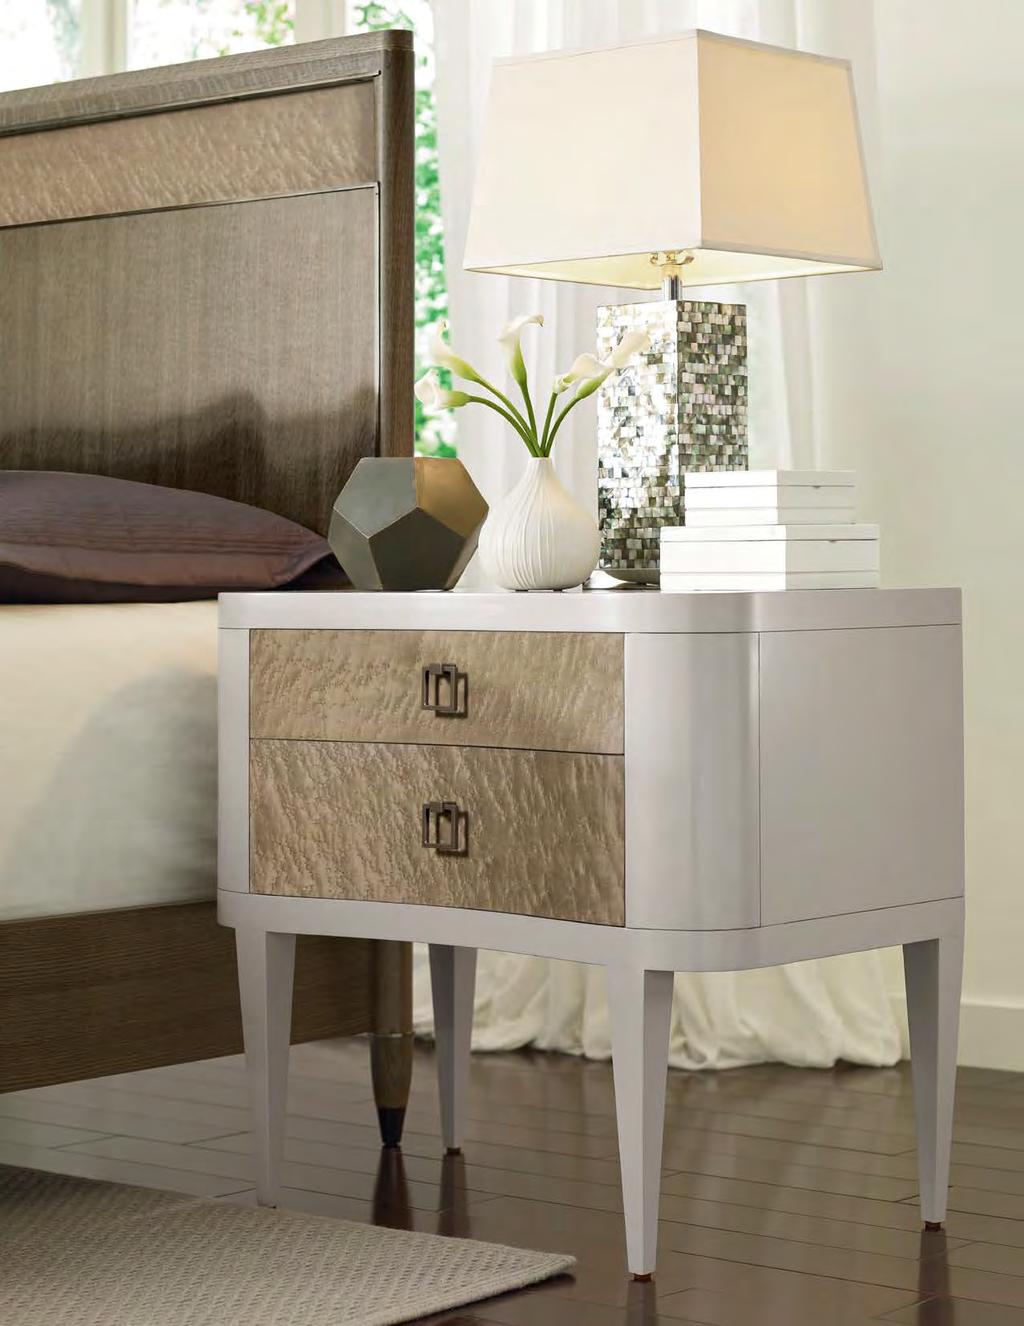 603-421 Watson Two Drawer Nightstand CLASSICS In a landscape cluttered by cheapened copies, beautiful designs with authentic materials have a way of standing out.